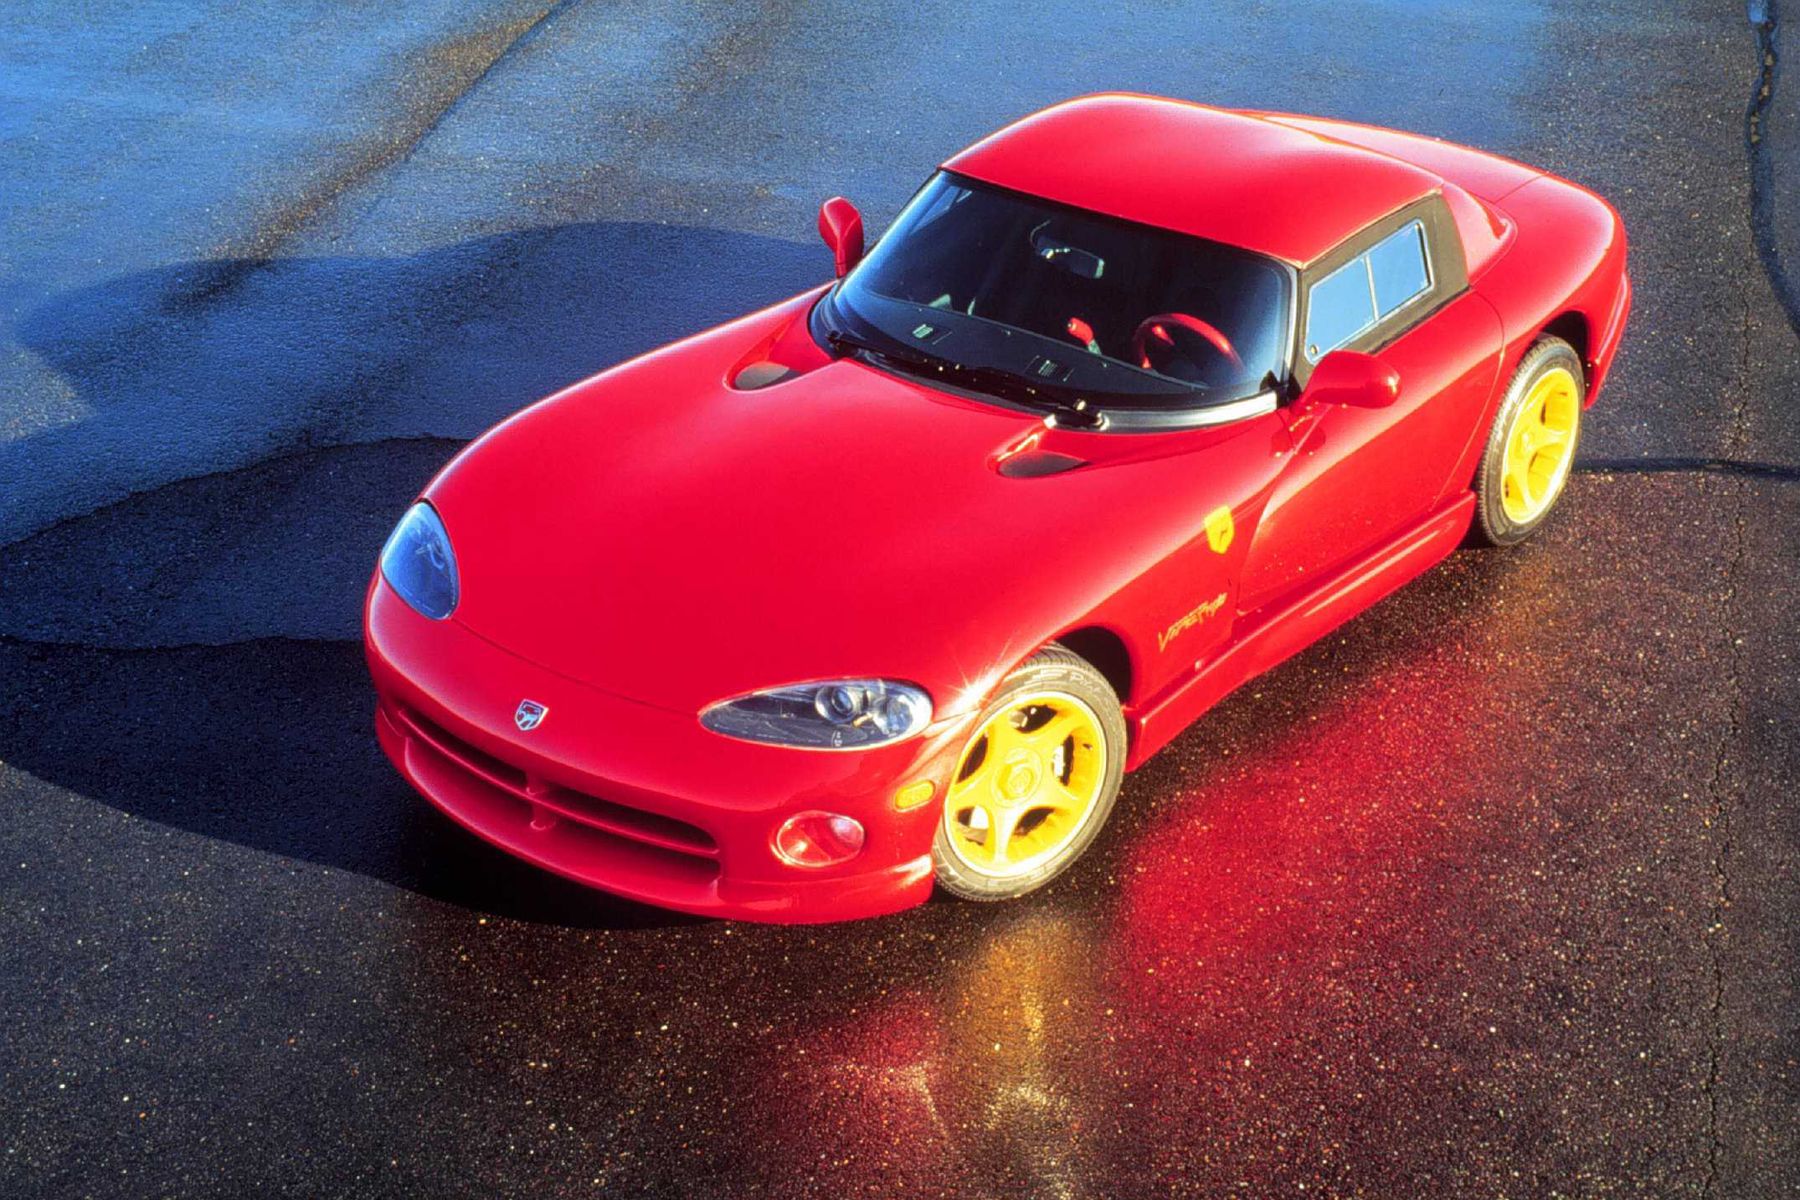 Dodge Viper – The Full Story of the World's First V10 Sports Car